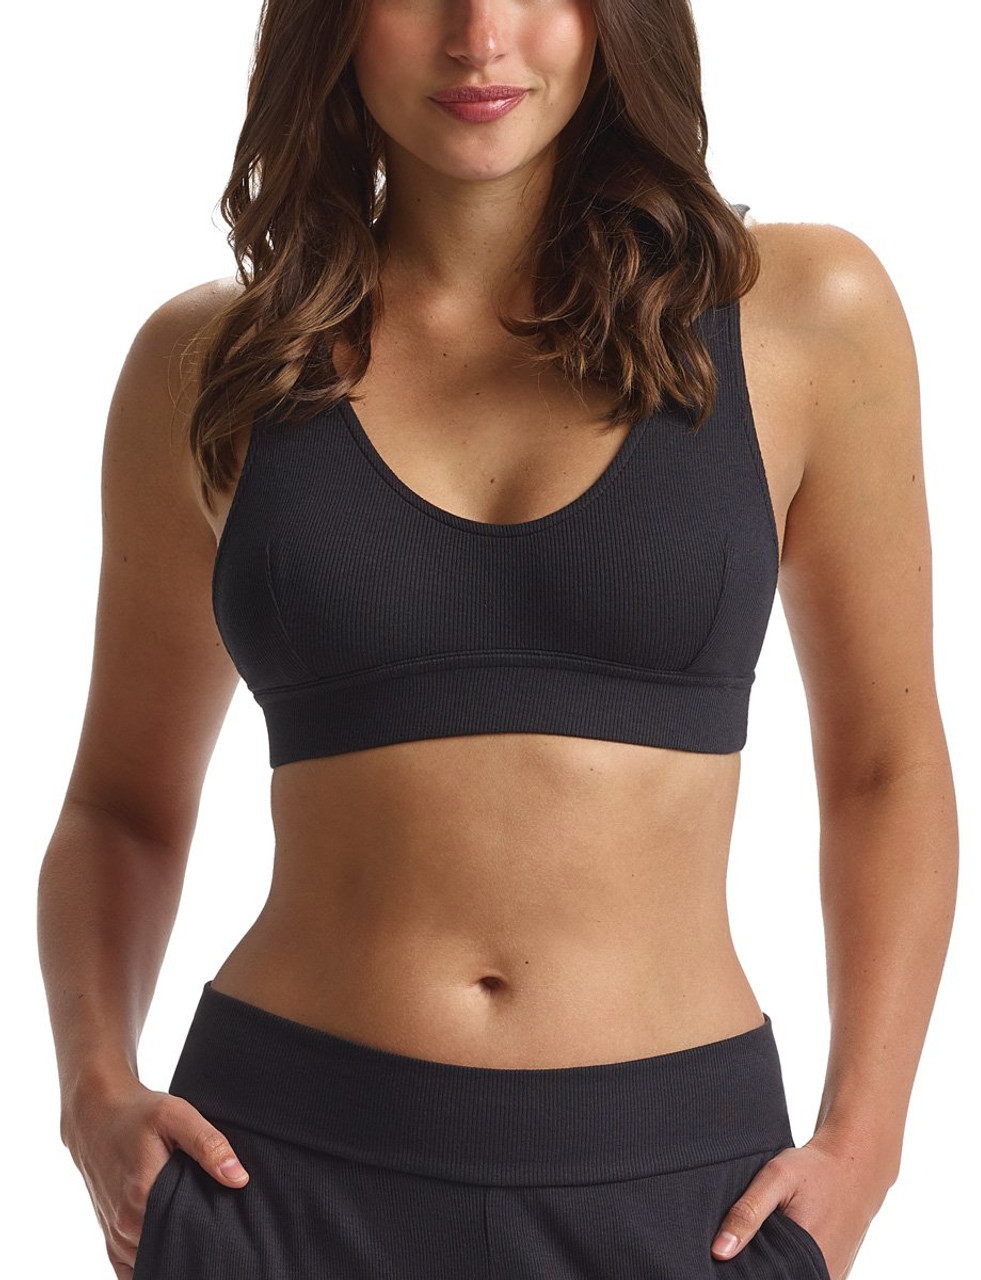 Commando Classic Soft-Support Bralette in Black - Busted Bra Shop